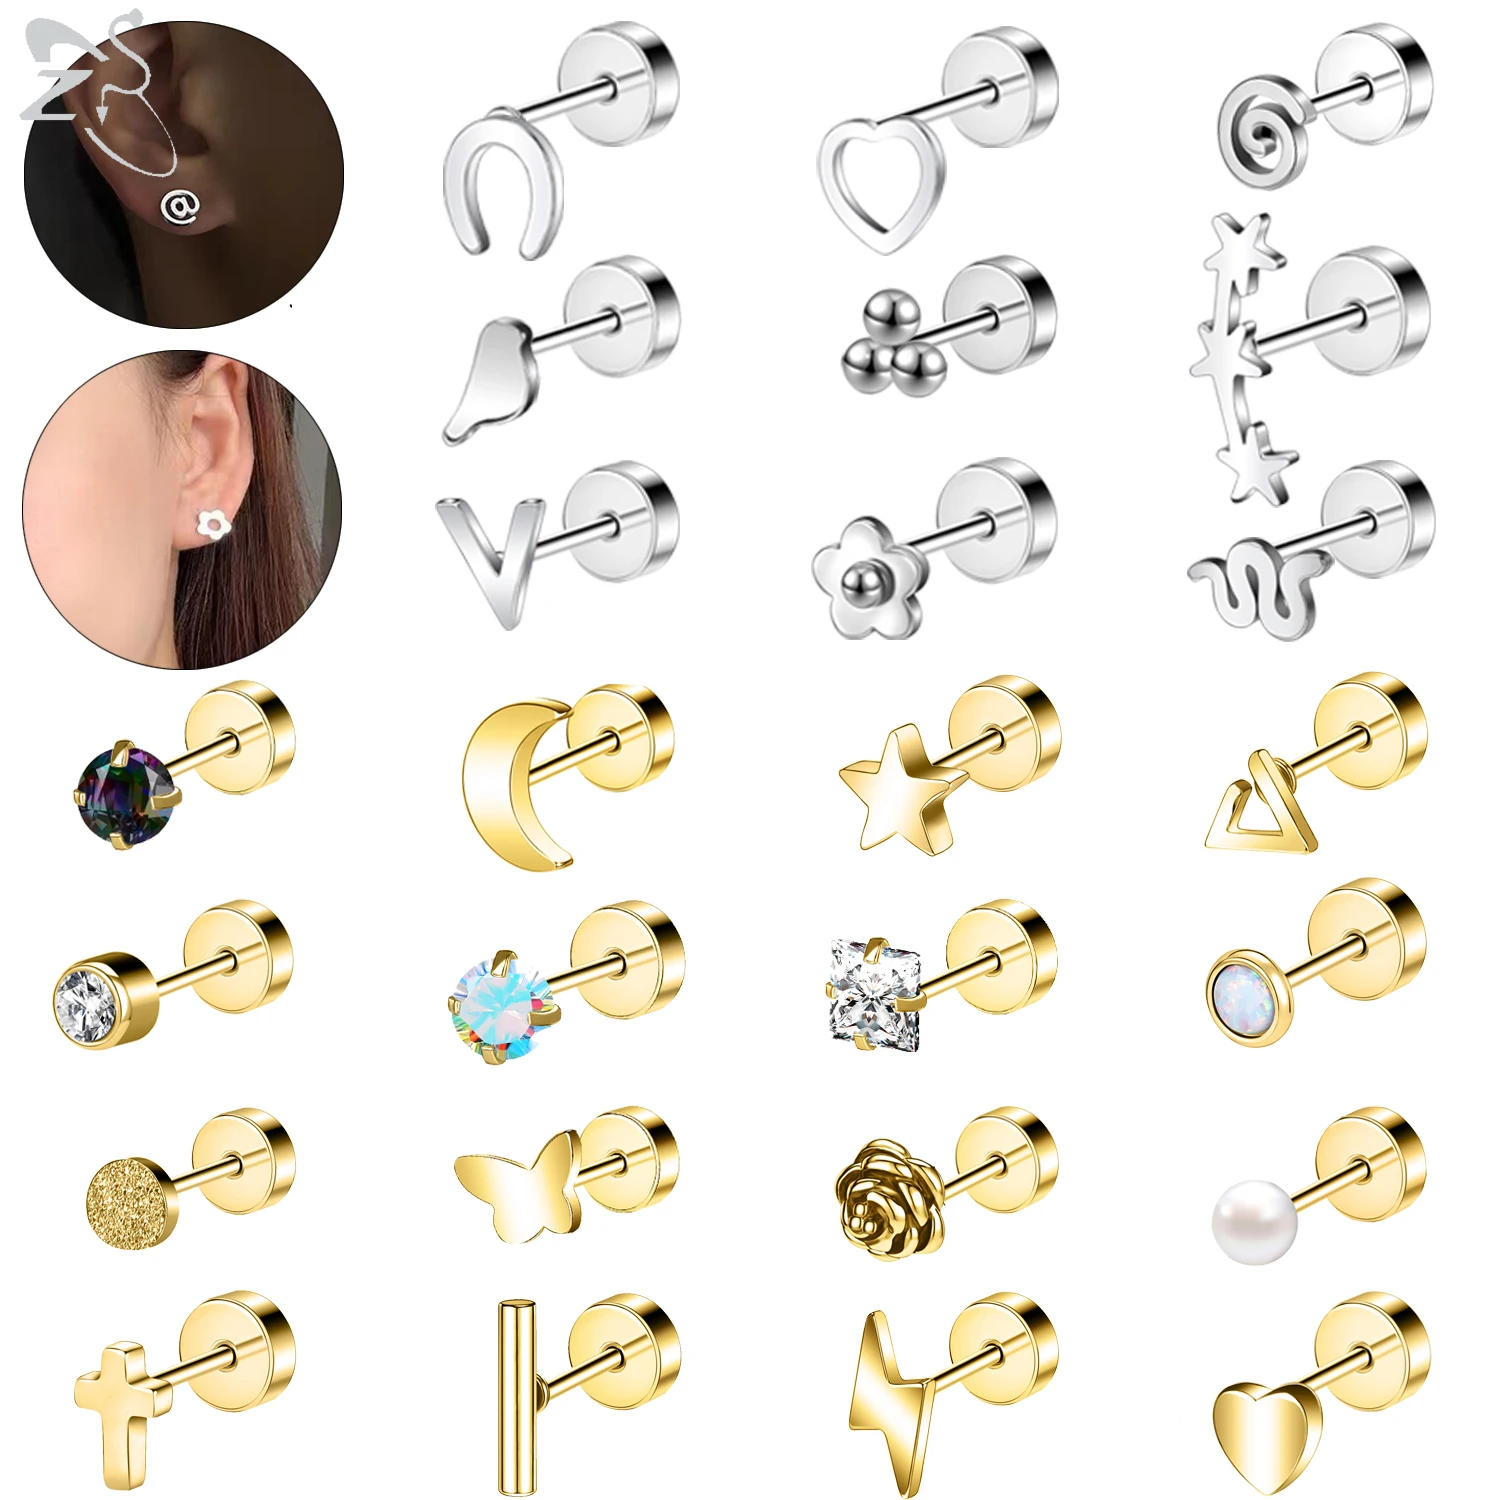 

ZS 2pcs/lot 20G 316L Stainless Steel Stud Earring for Women Girl Crystal Earring Gold Color Ear Cartilage Helix Tragus Piercing